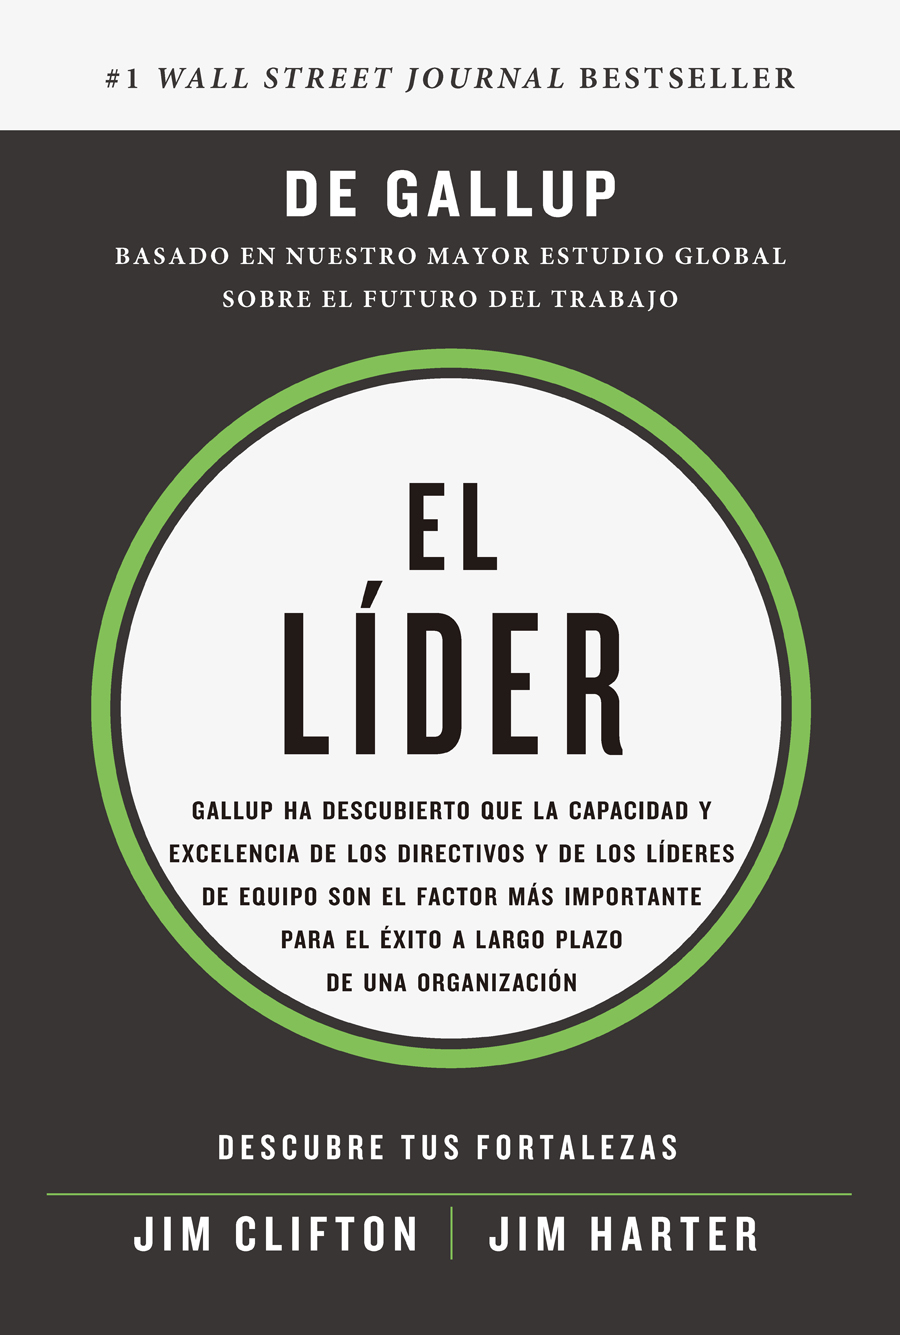 El líder Its the Manager Copyright 2019 Gallup Inc All rights reserved - photo 1